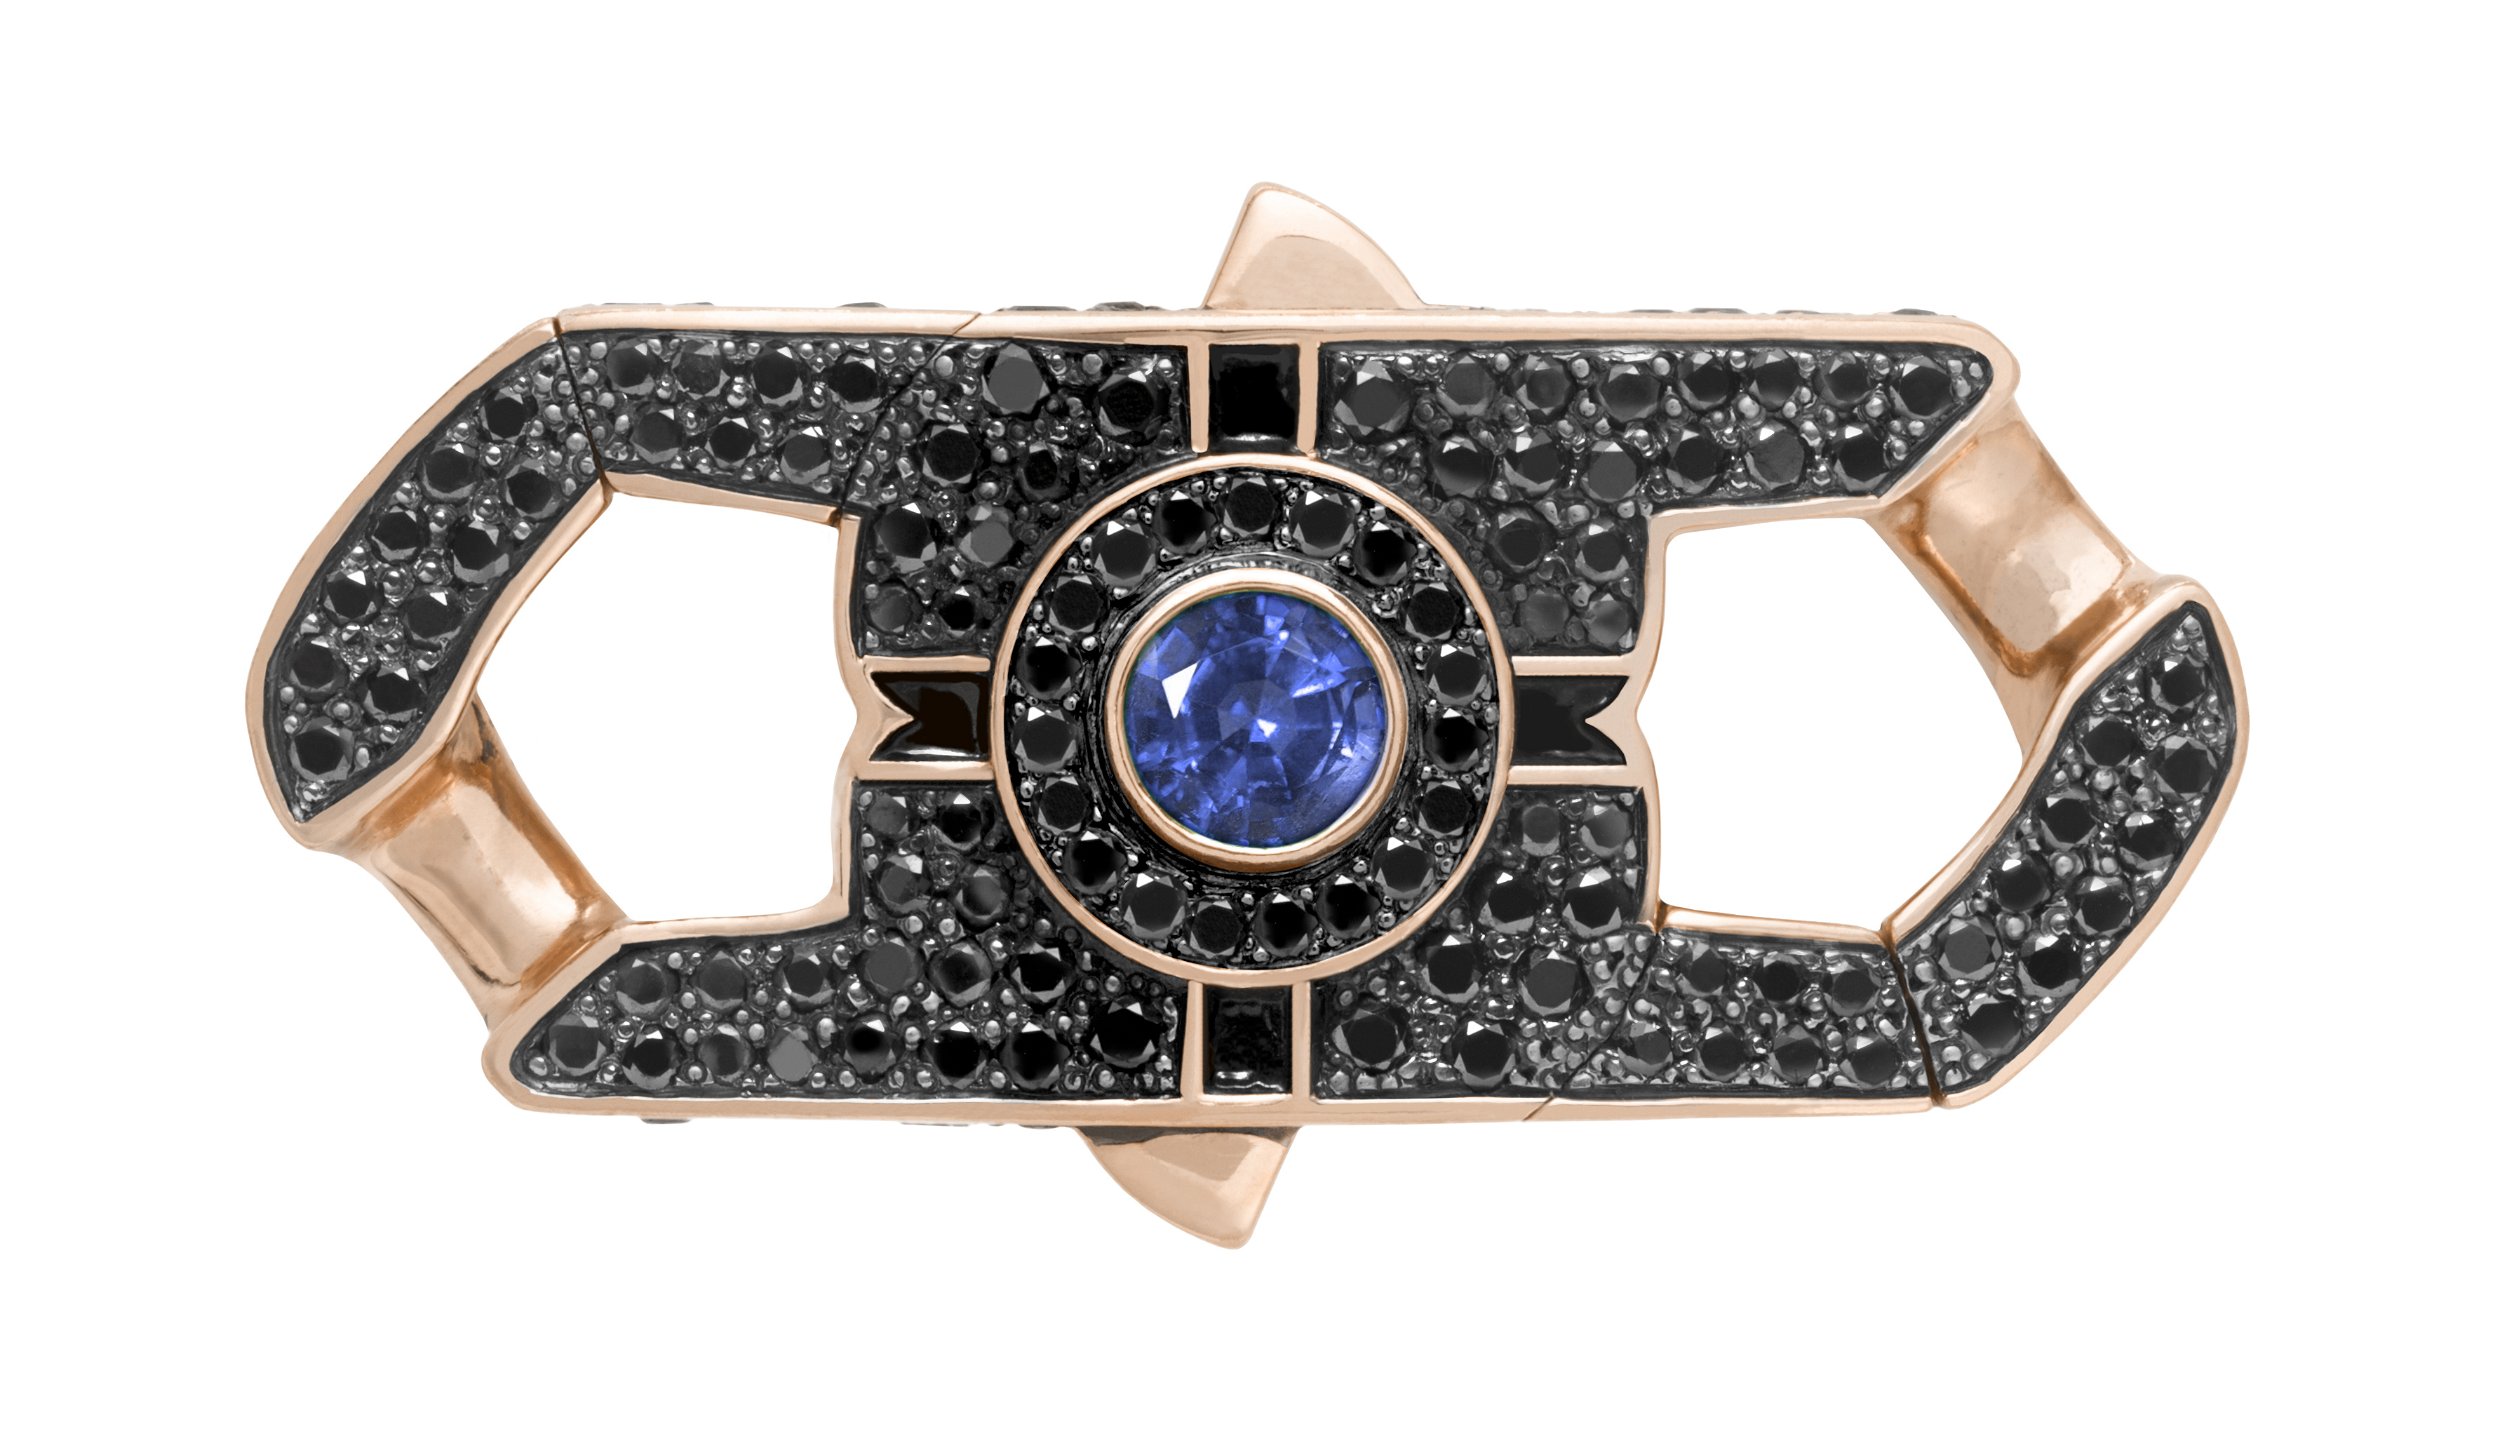 England Made Me Revolutionary Bracelet Clasp with Enamel, Black Mother of Pearl, Blue Sapphire and Black Diamonds in 18kt Rose Gold - 18mm